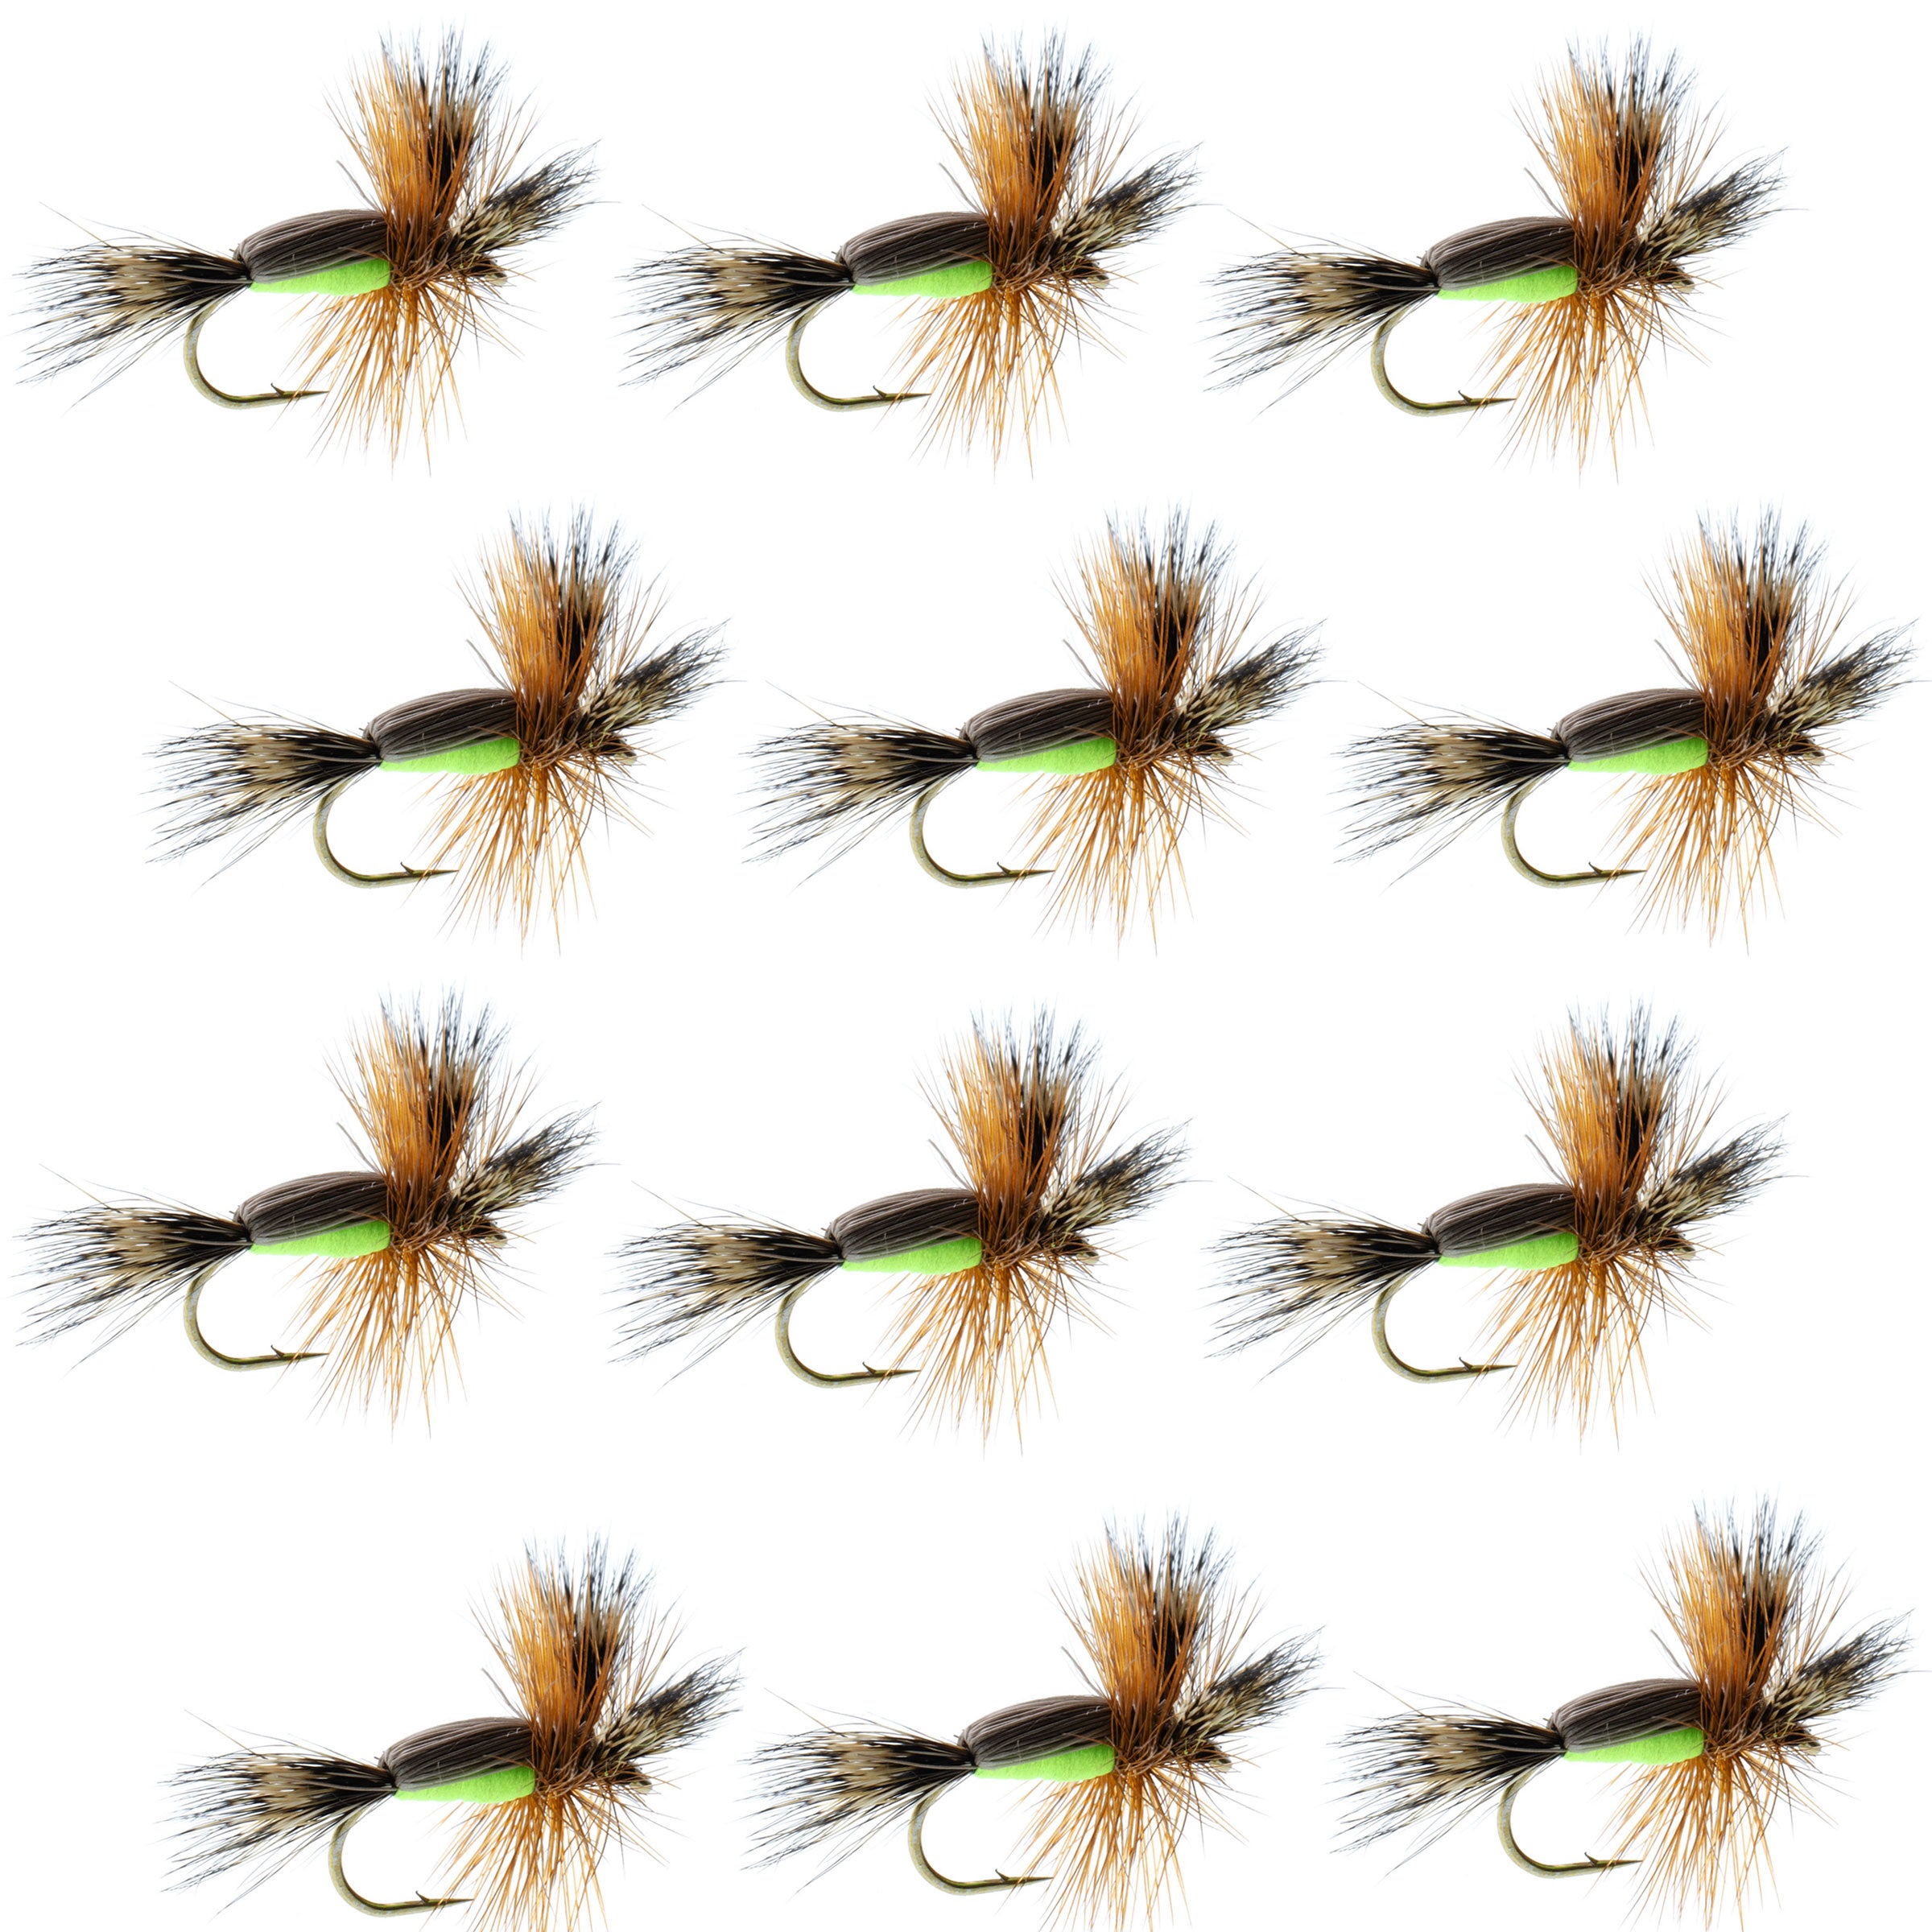 Chartreuse Humpy Classic Hair Wing Dry Fly - 1 docena de anzuelos para moscas, tamaño 10